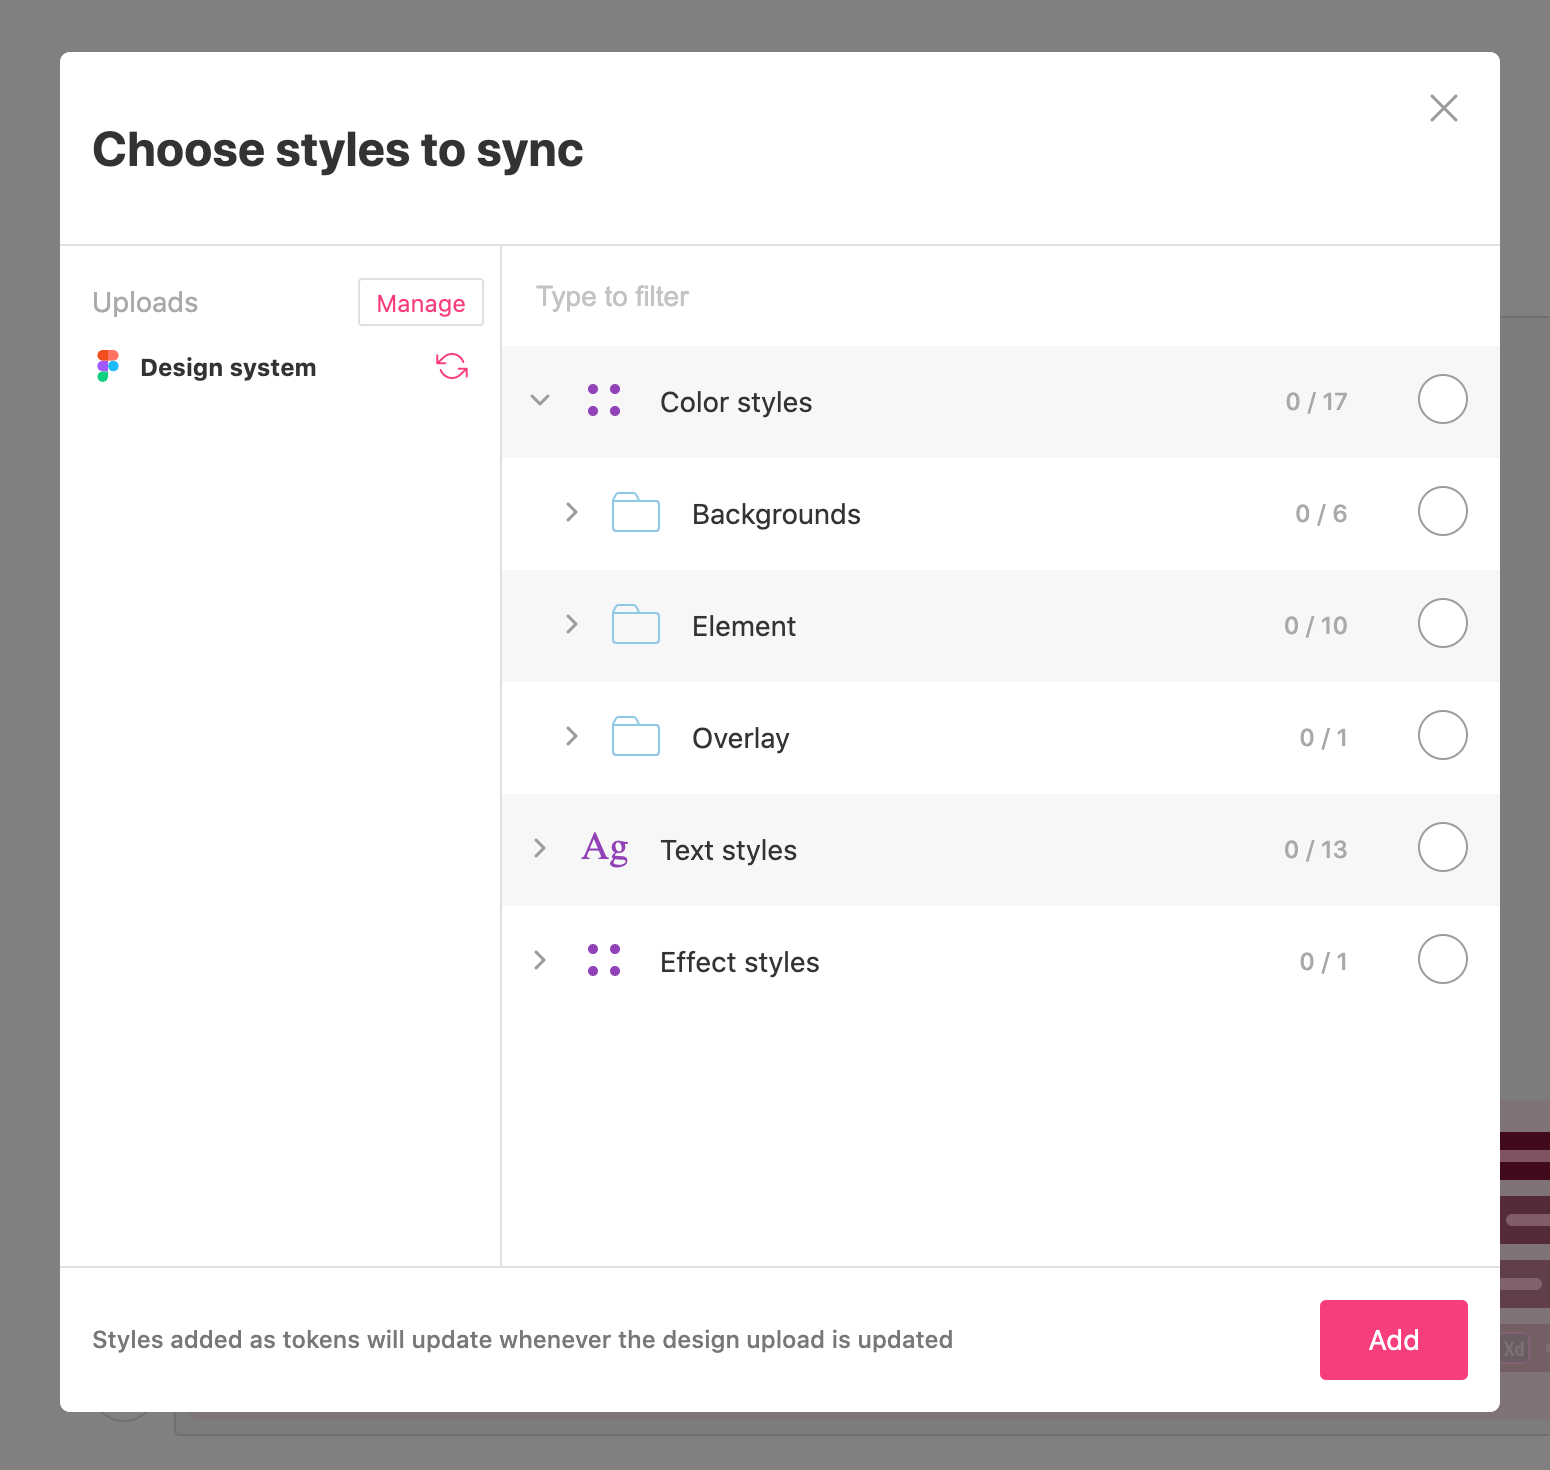 Sync styles from design uploads